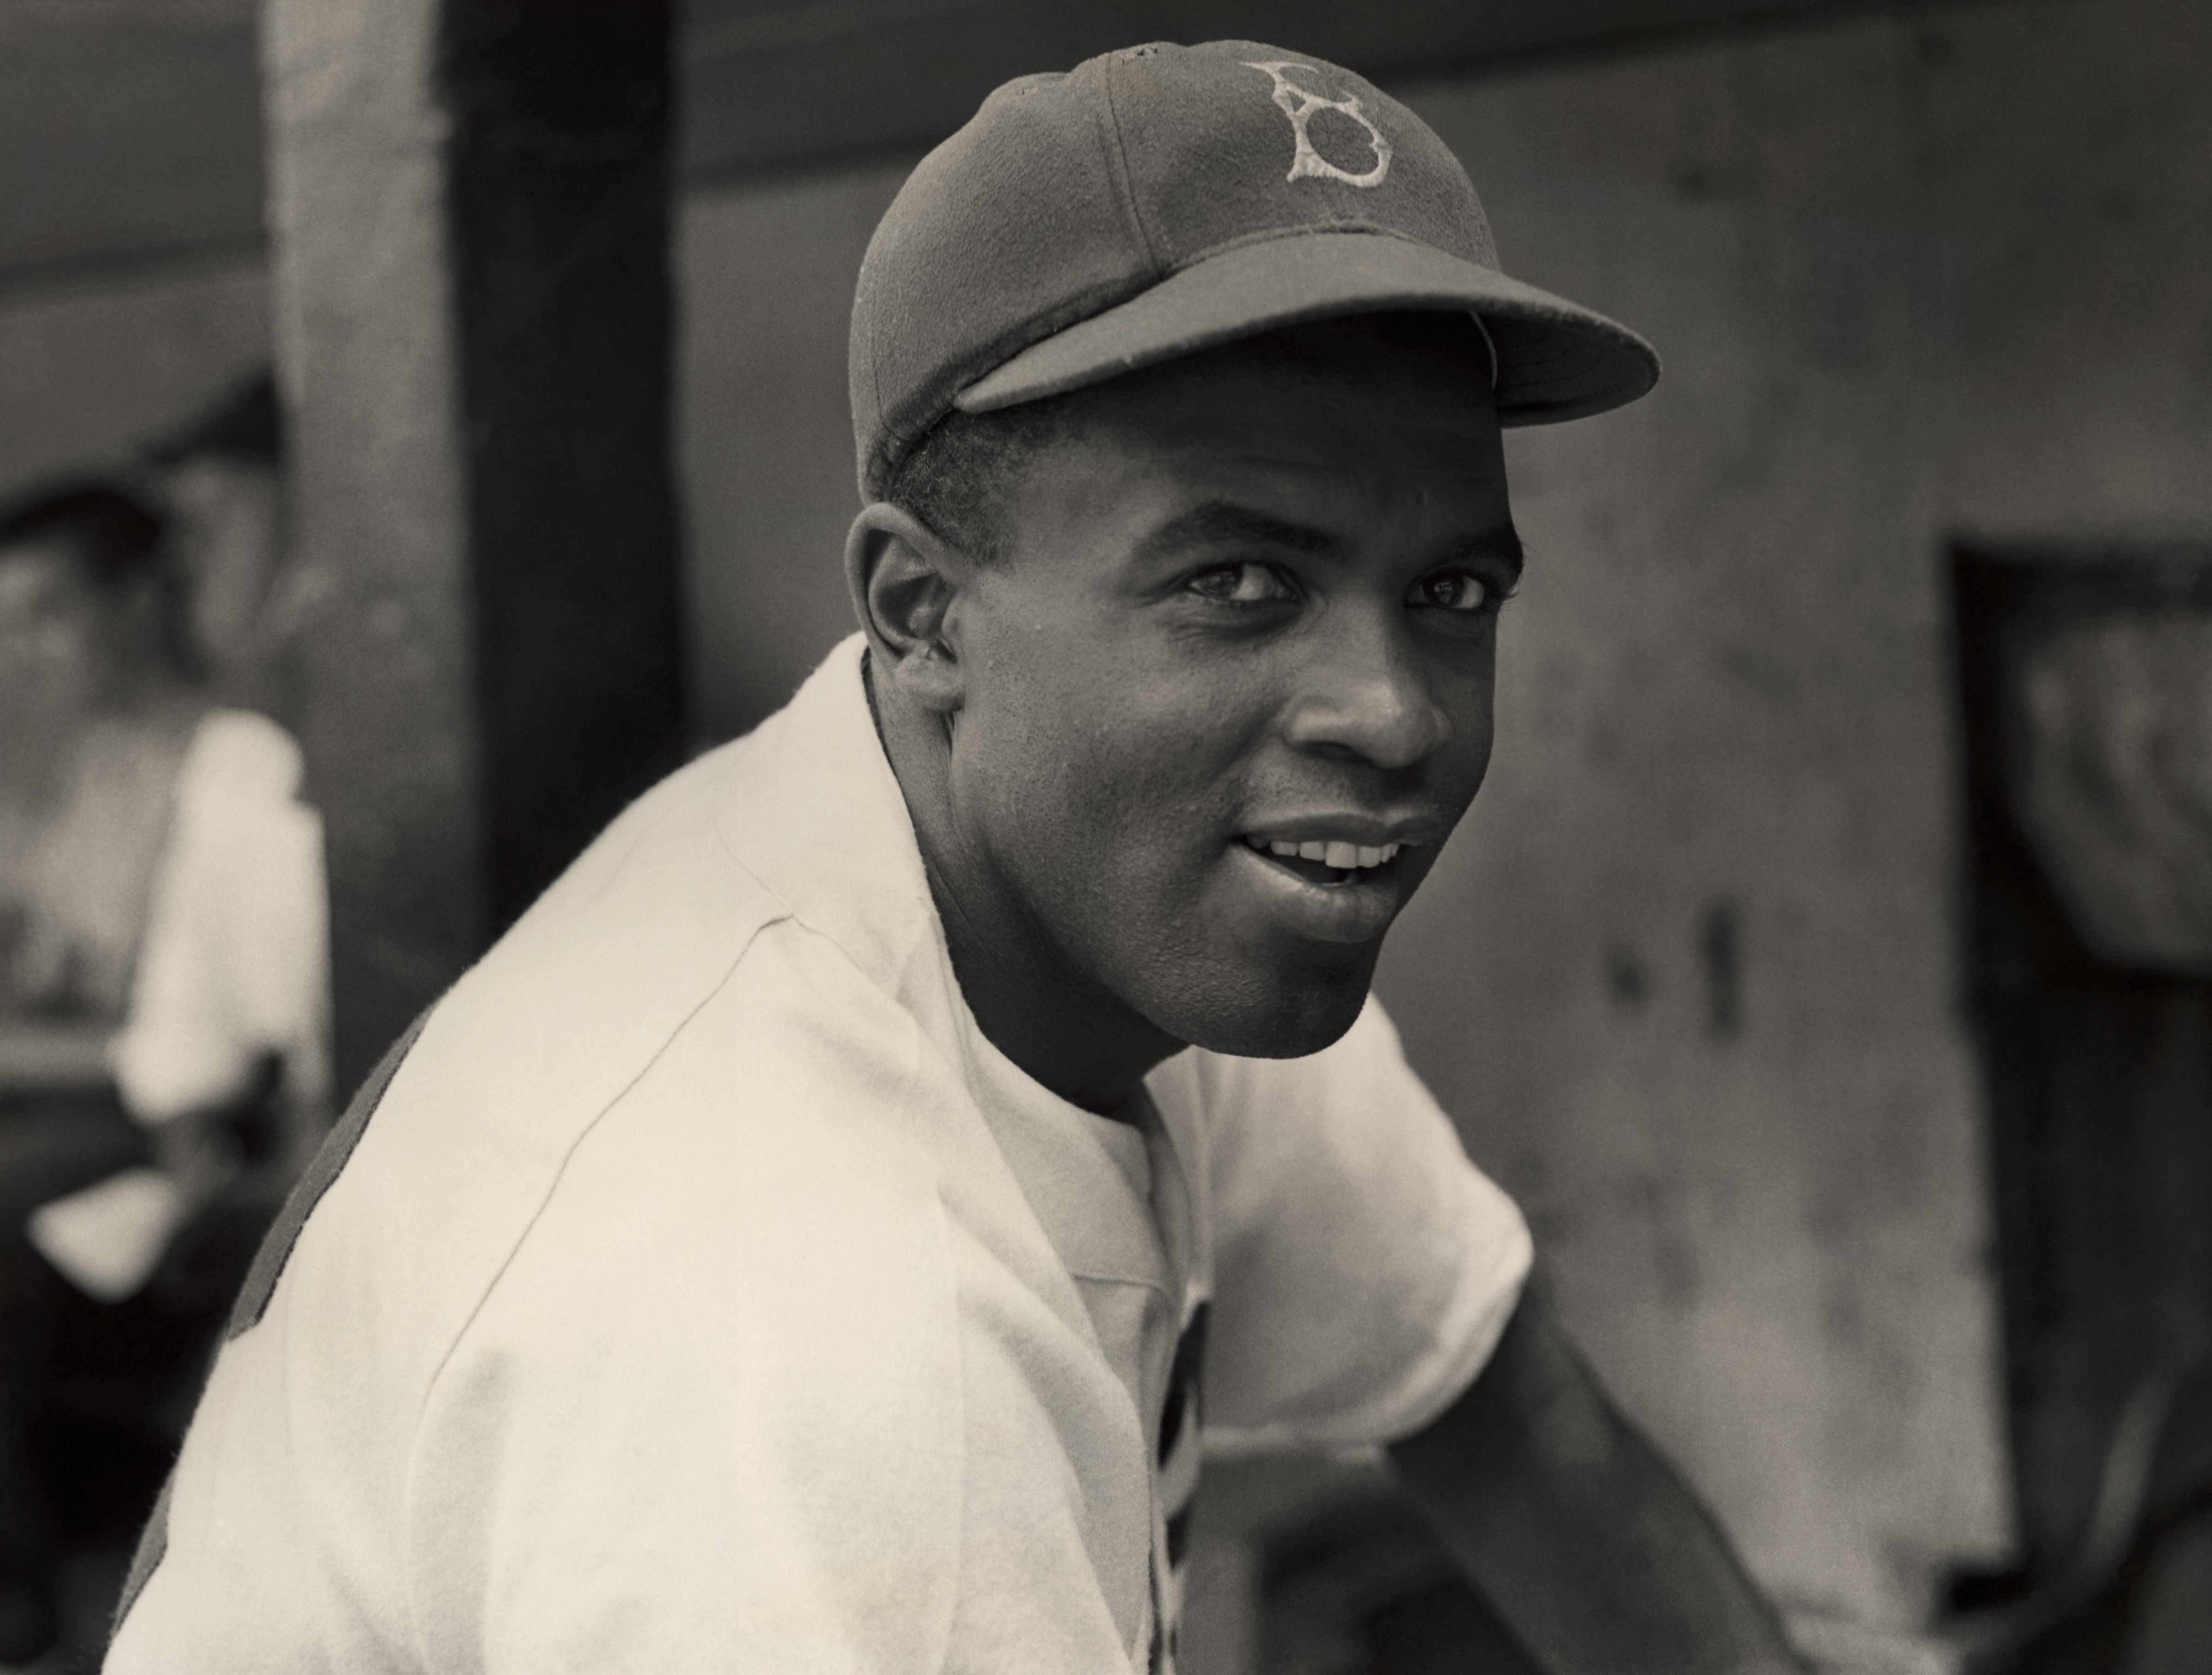 Jackie Robinson Day to be celebrated on 77th anniversary of his
groundbreaking MLB debut